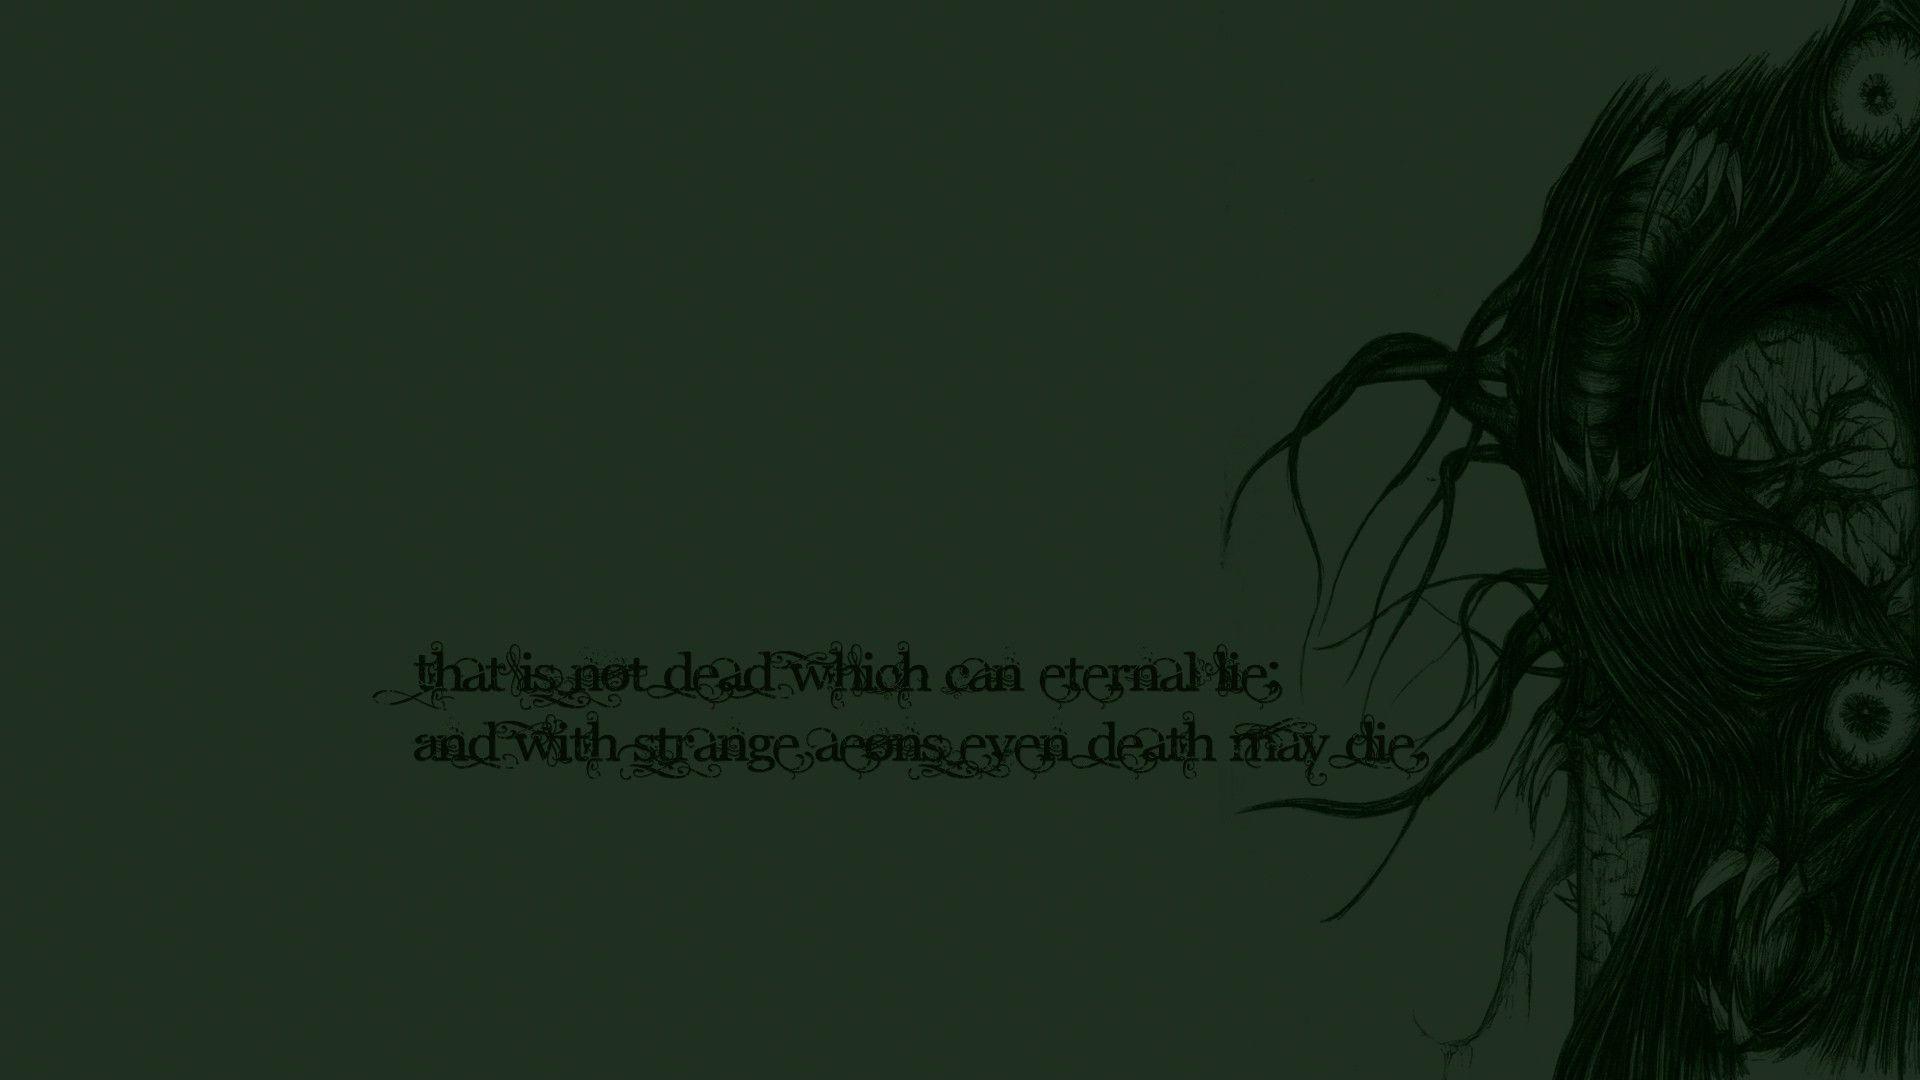 Hp Wallpaper Hd: The Image Of Cthulhu Hp Lovecraft Fresh HD